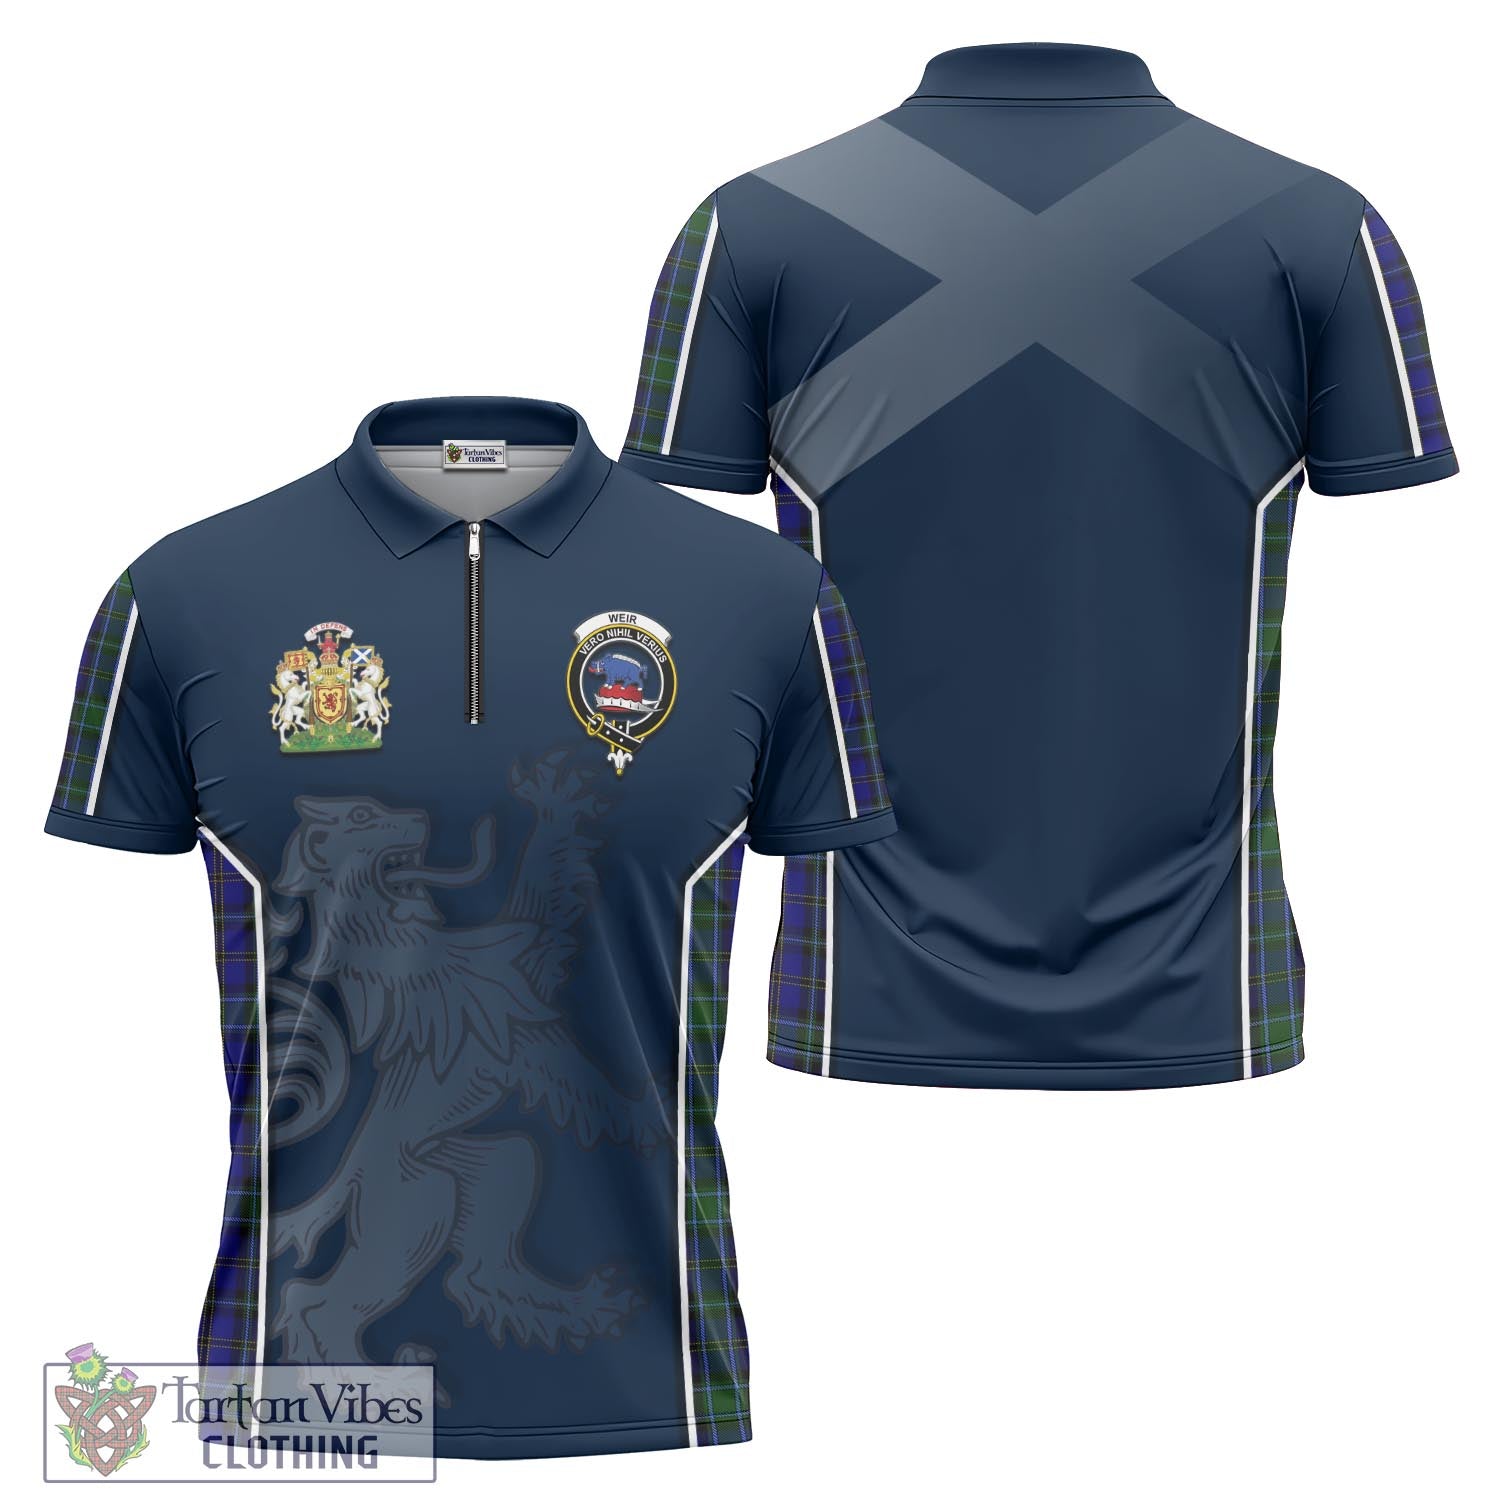 Tartan Vibes Clothing Weir Tartan Zipper Polo Shirt with Family Crest and Lion Rampant Vibes Sport Style